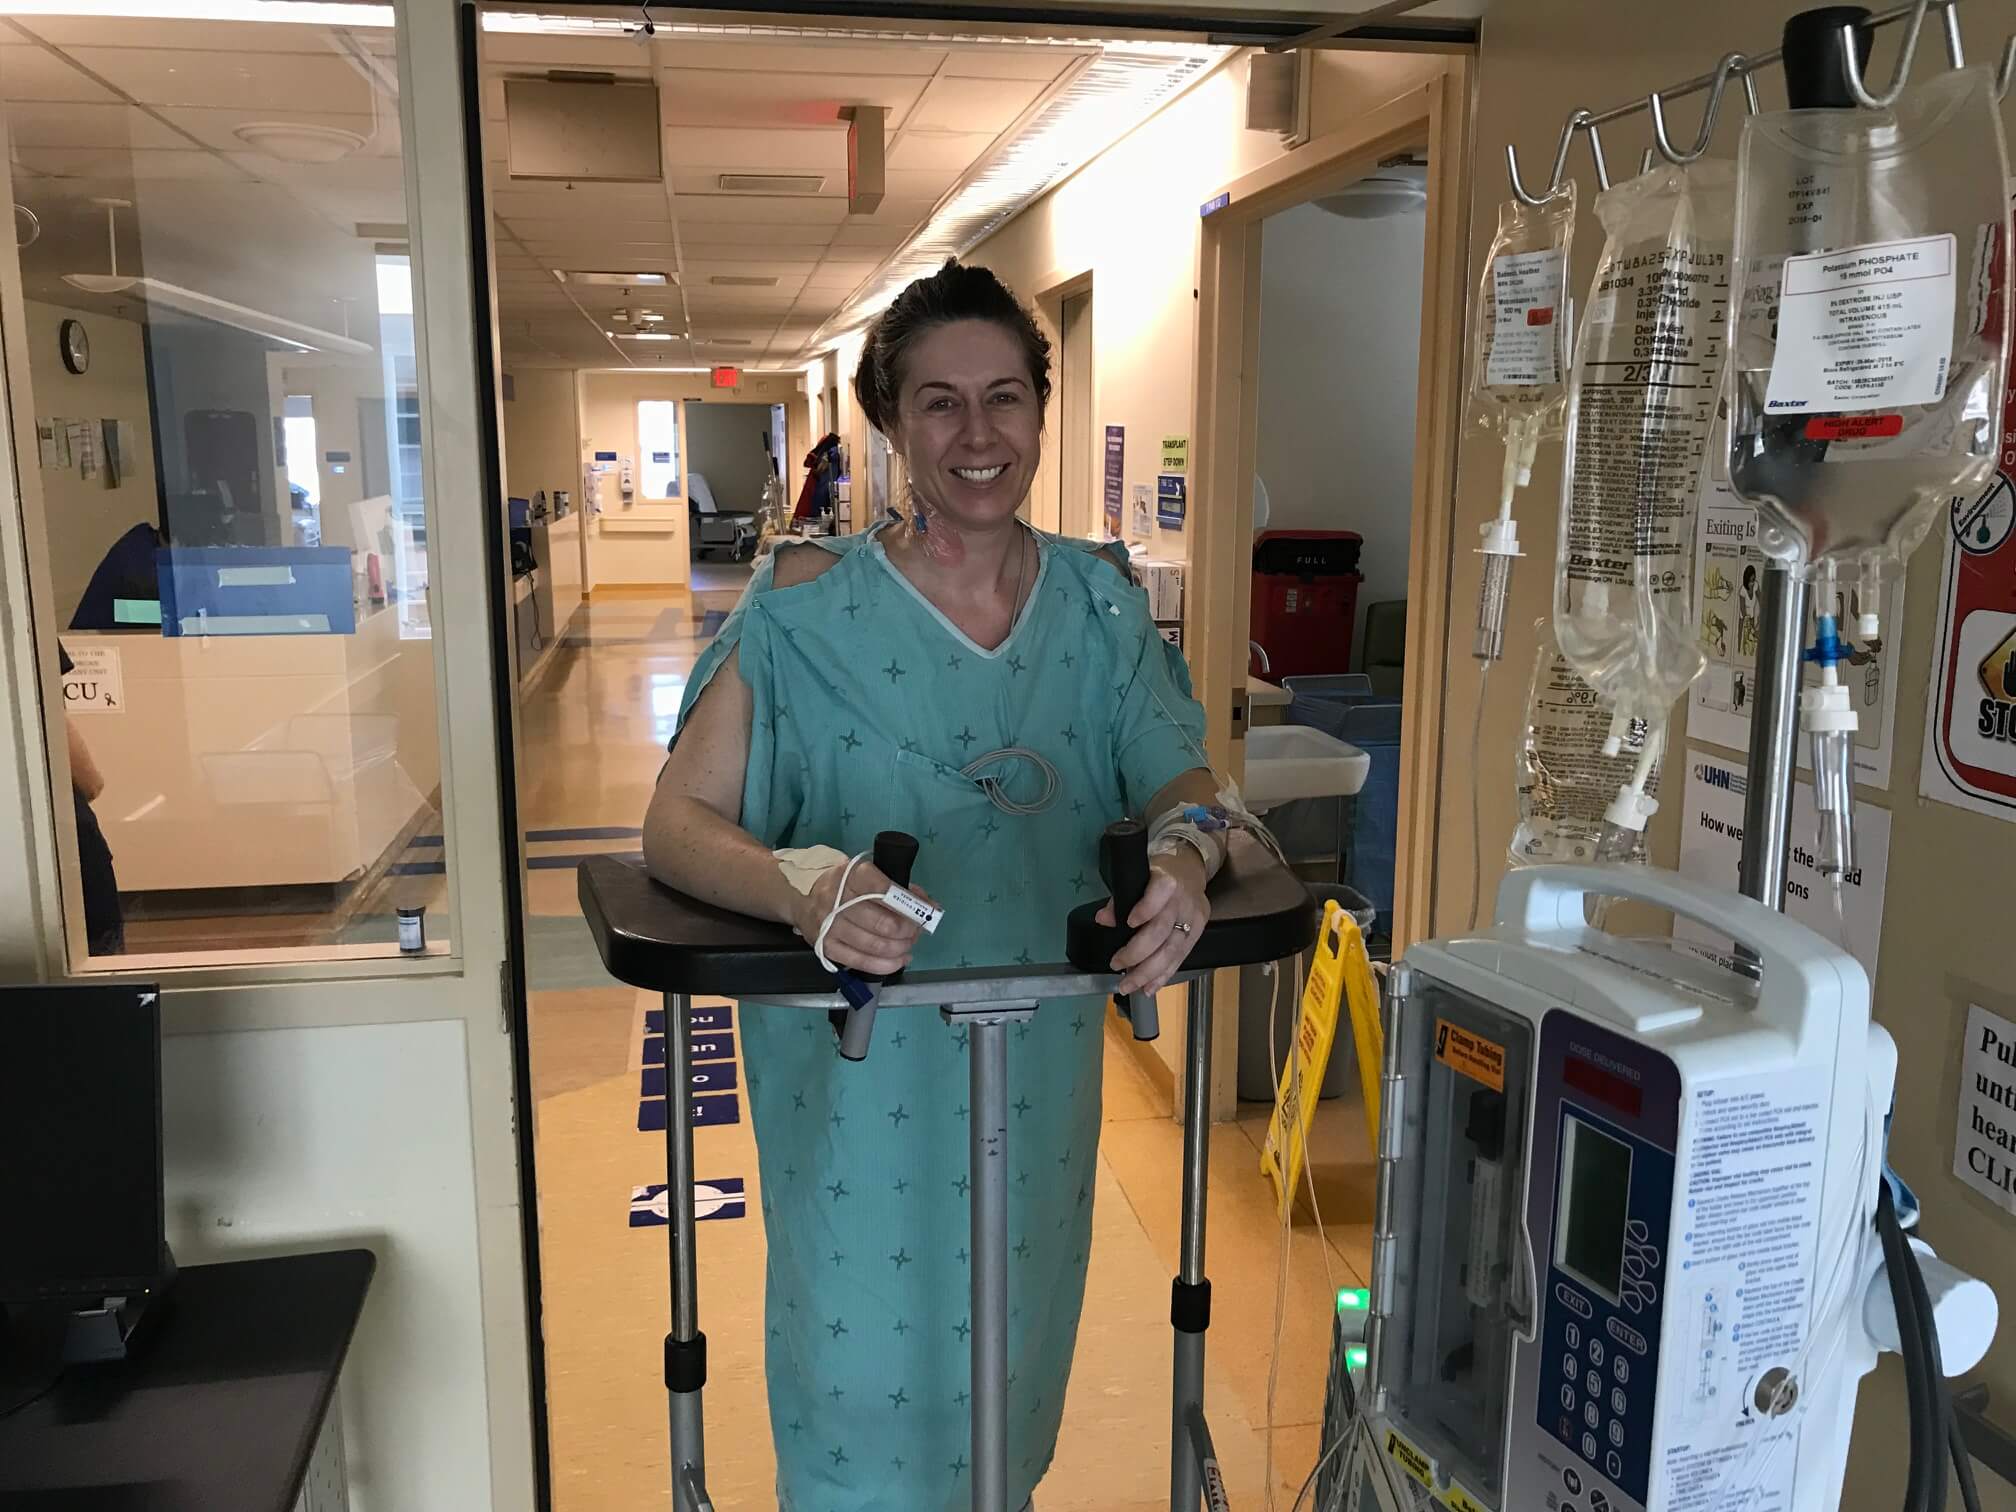 Heather leans on a walker smiling. She is wearing a hospital gown and is connected to a machine with IV bags.